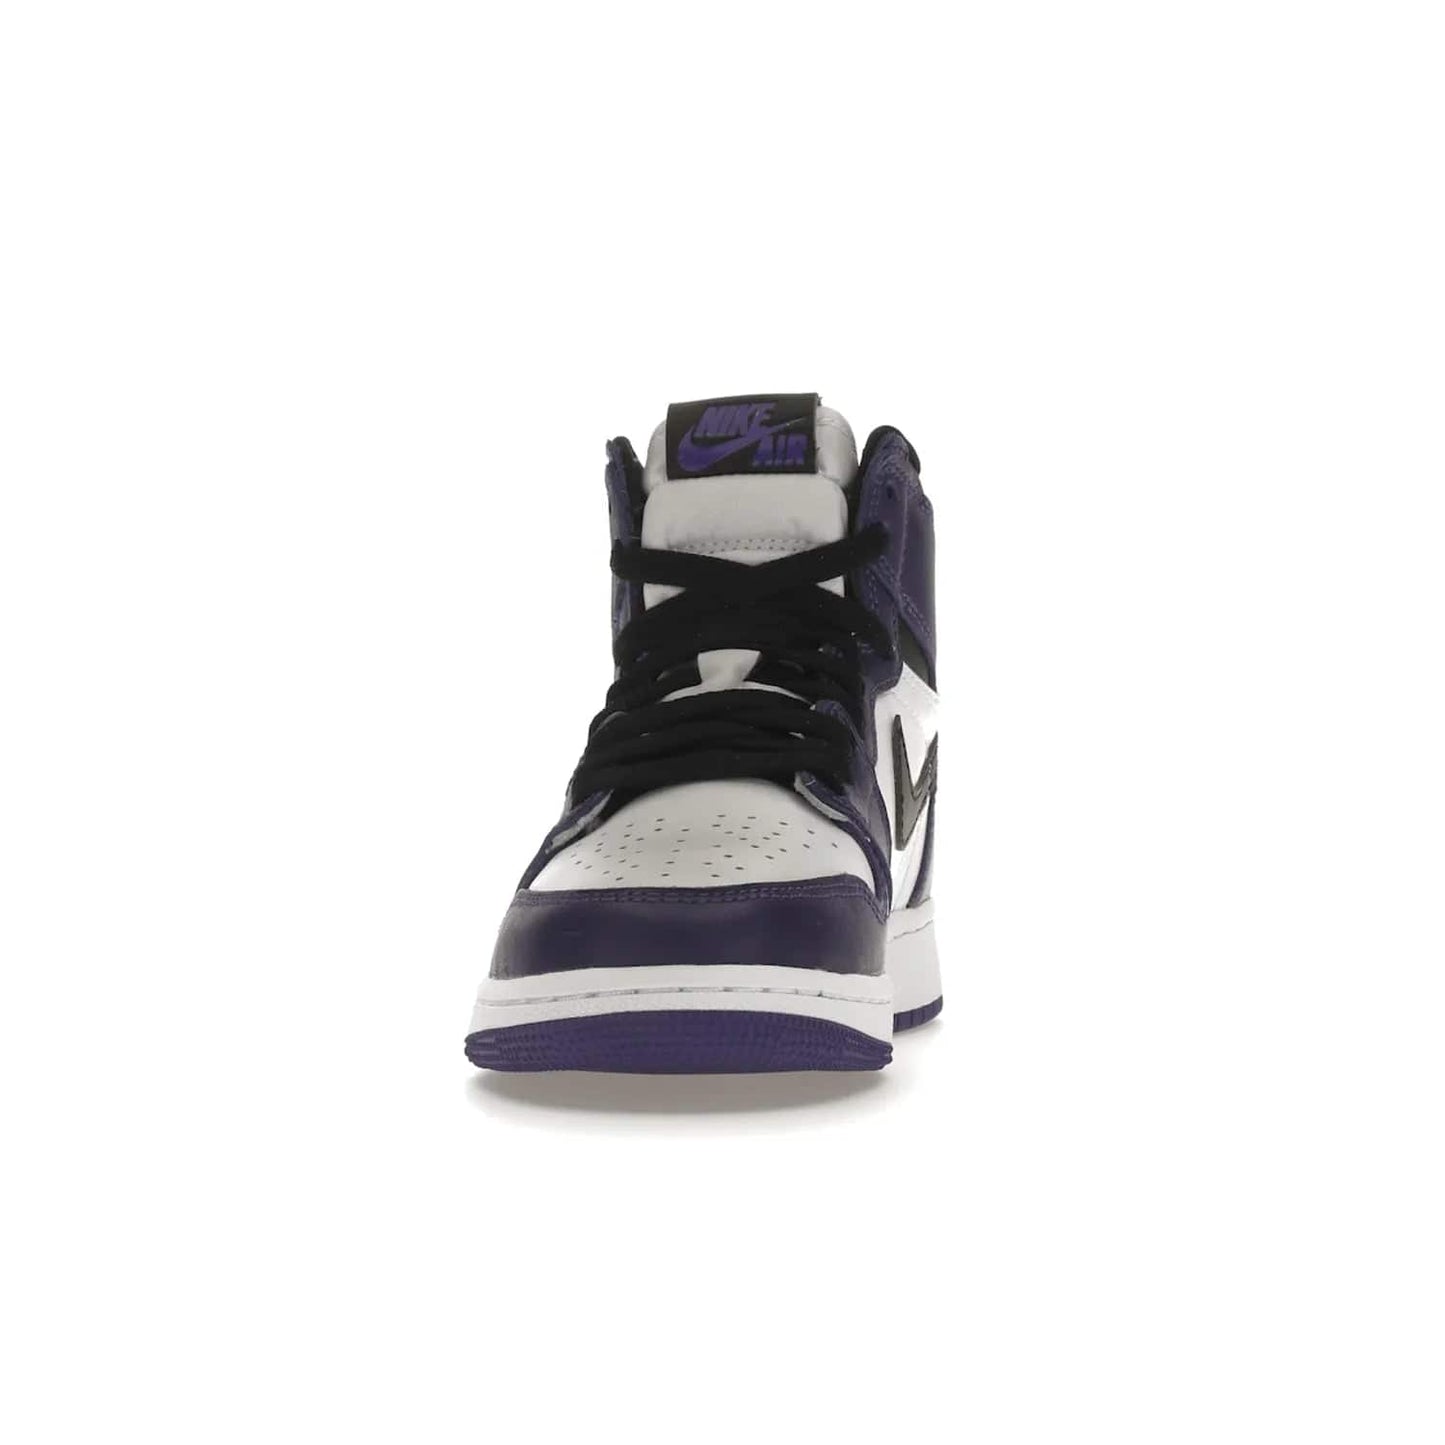 Jordan 1 Retro High Court Purple White (GS) - Image 11 - Only at www.BallersClubKickz.com - The Air Jordan 1 Retro High Court Purple is here and young sneaker heads can show off classic style. Features a white tumbled leather upper, black swoosh, purple overlays, black collar with purple overlay, white tongue, black patch with purple Nike Air logo and swoosh, white midsole, and purple rubber outsole with circular pattern.